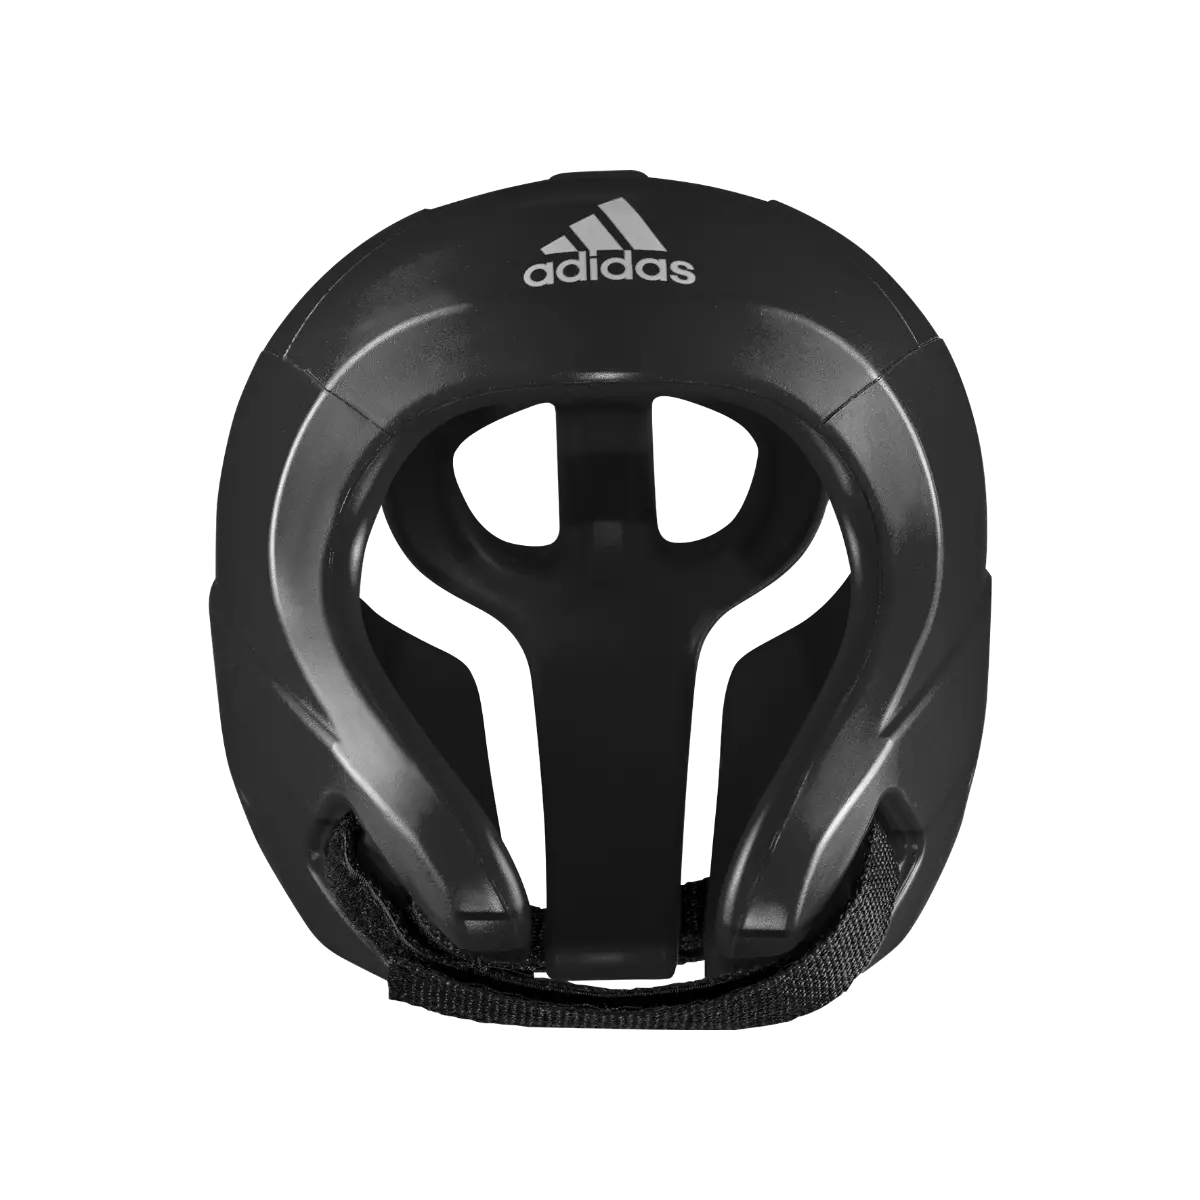 adidas WAKO Approved Kickboxing Head Guard Open Face